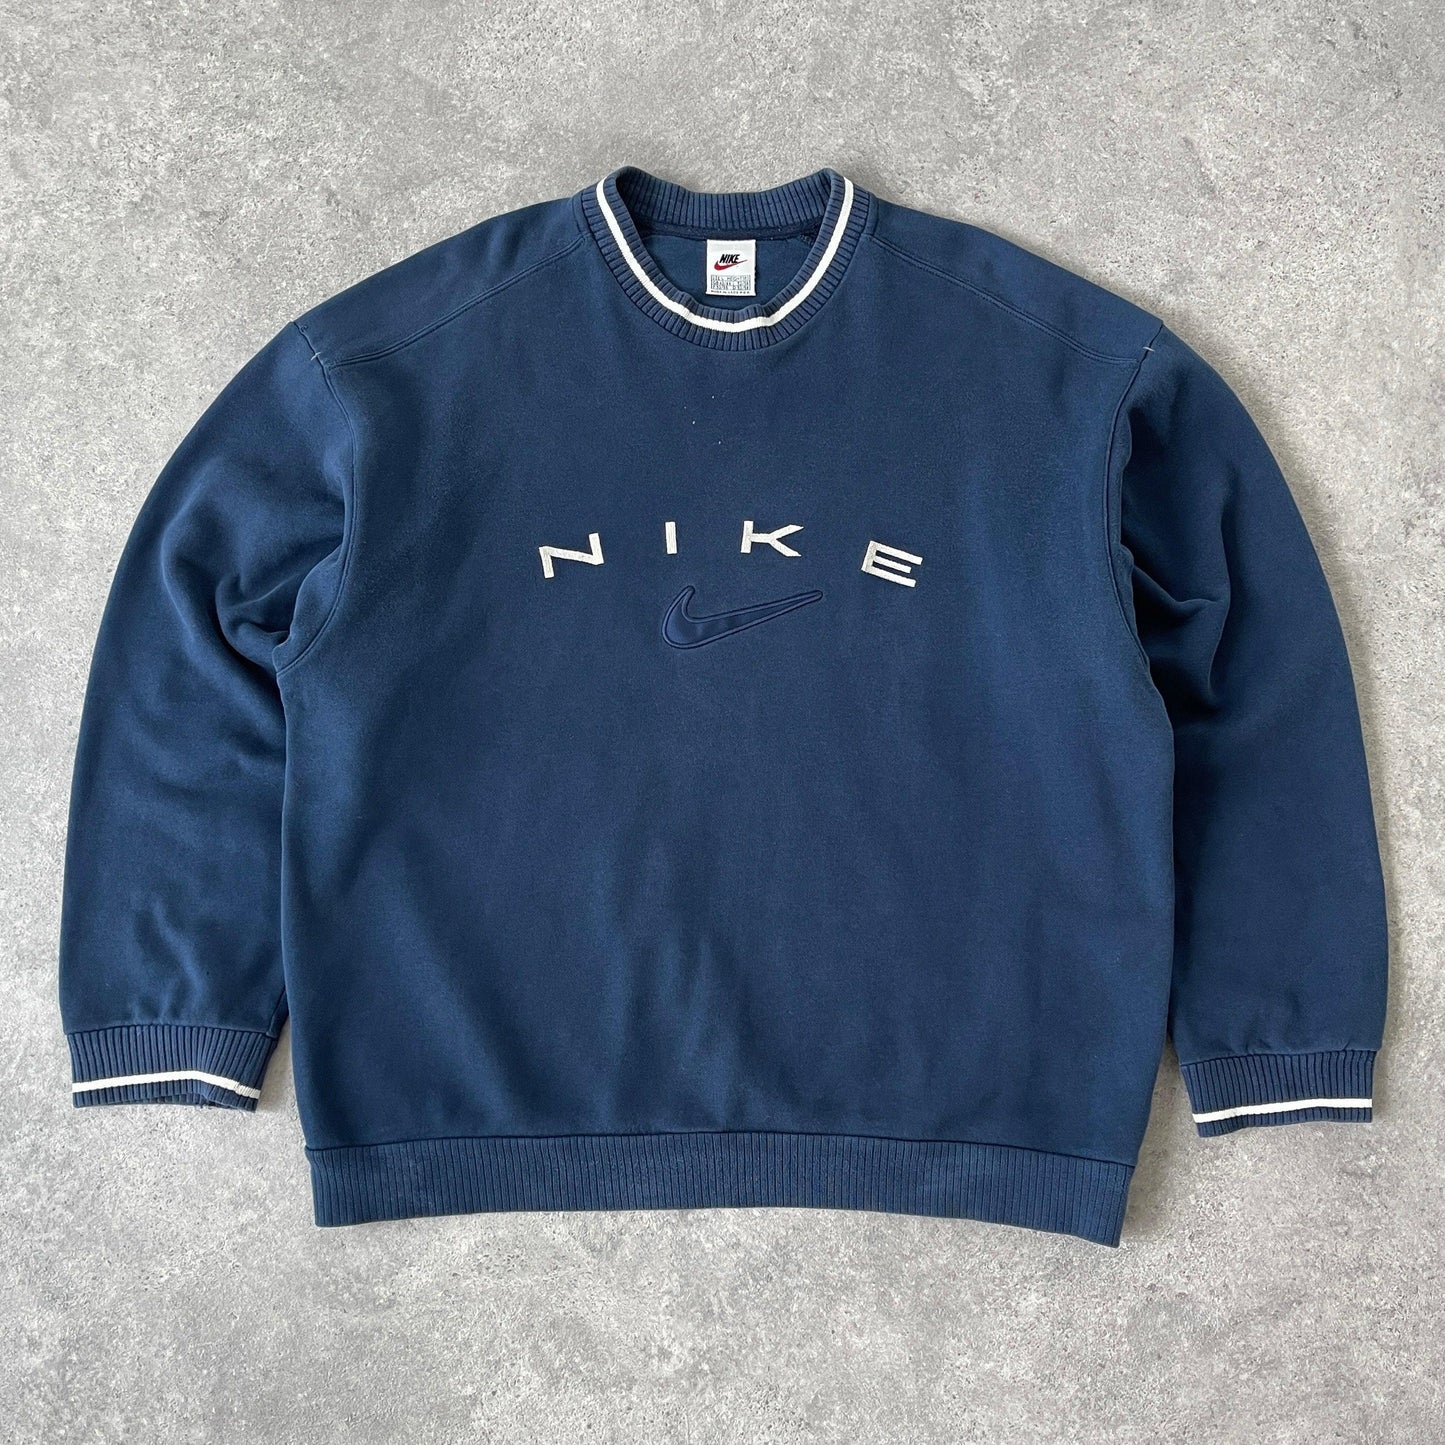 Nike RARE 1990s heavyweight embroidered spellout sweatshirt (L) - Known Source